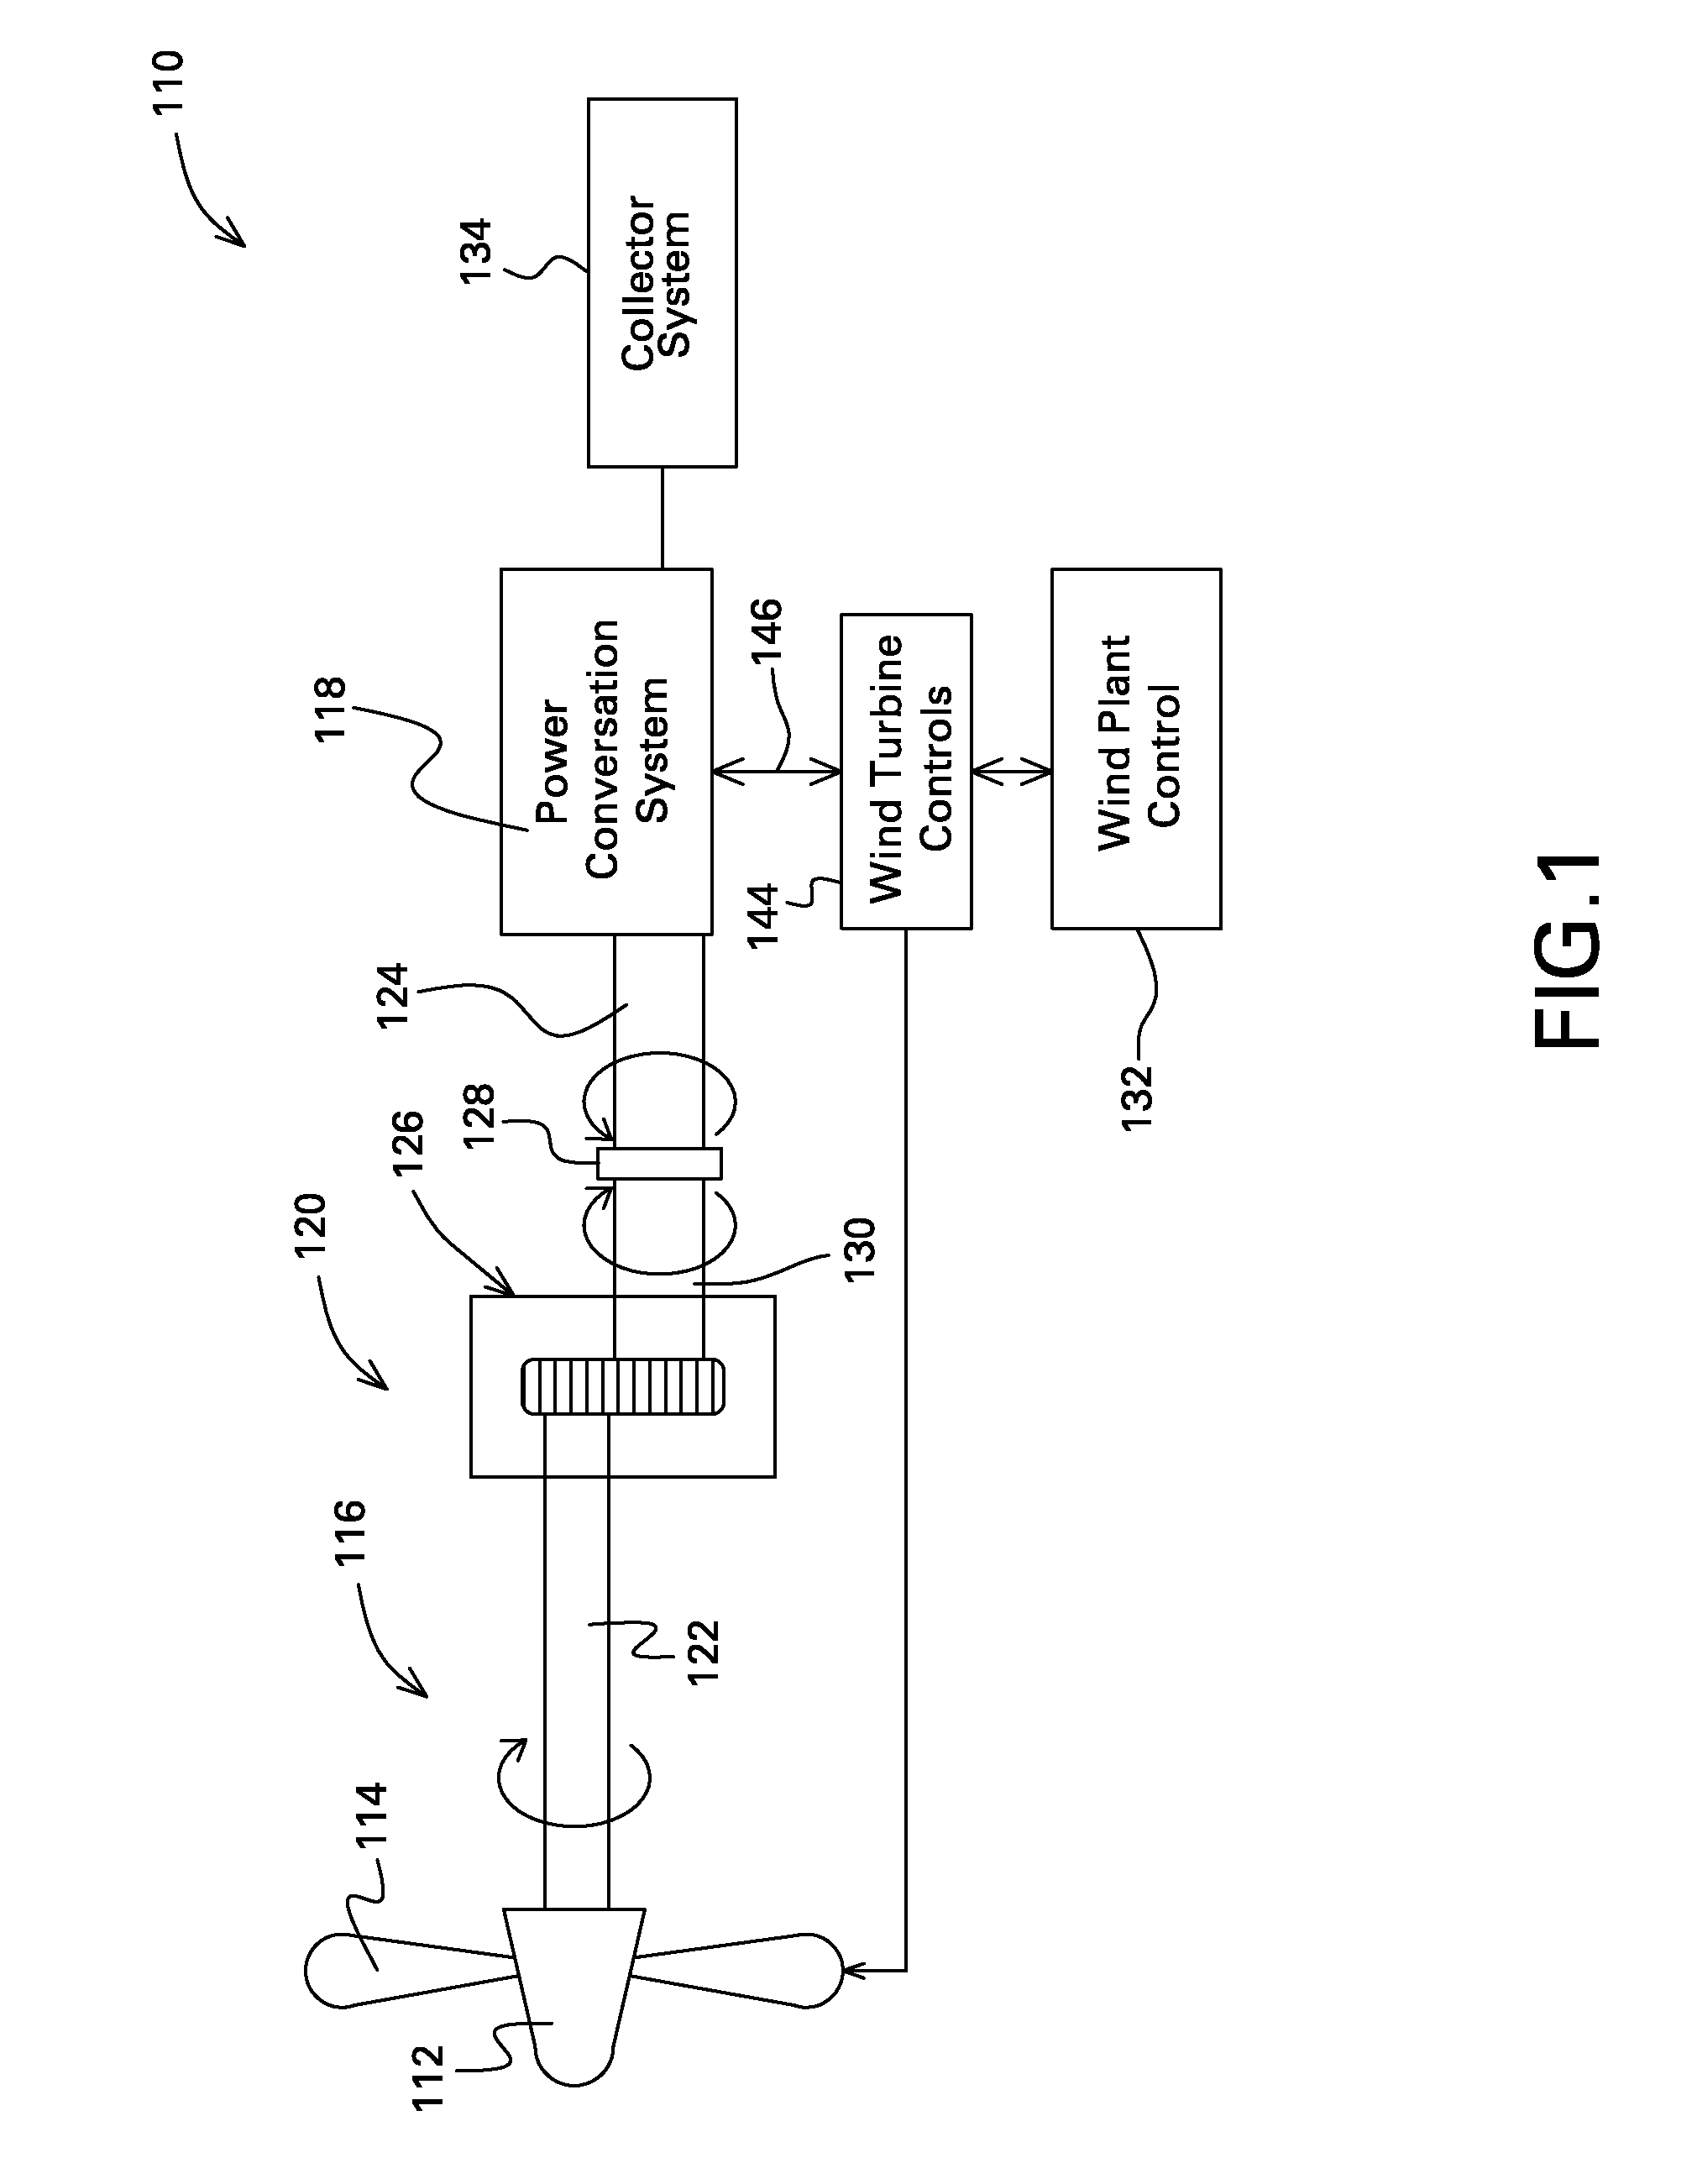 Power generation stabilization control systems and methods